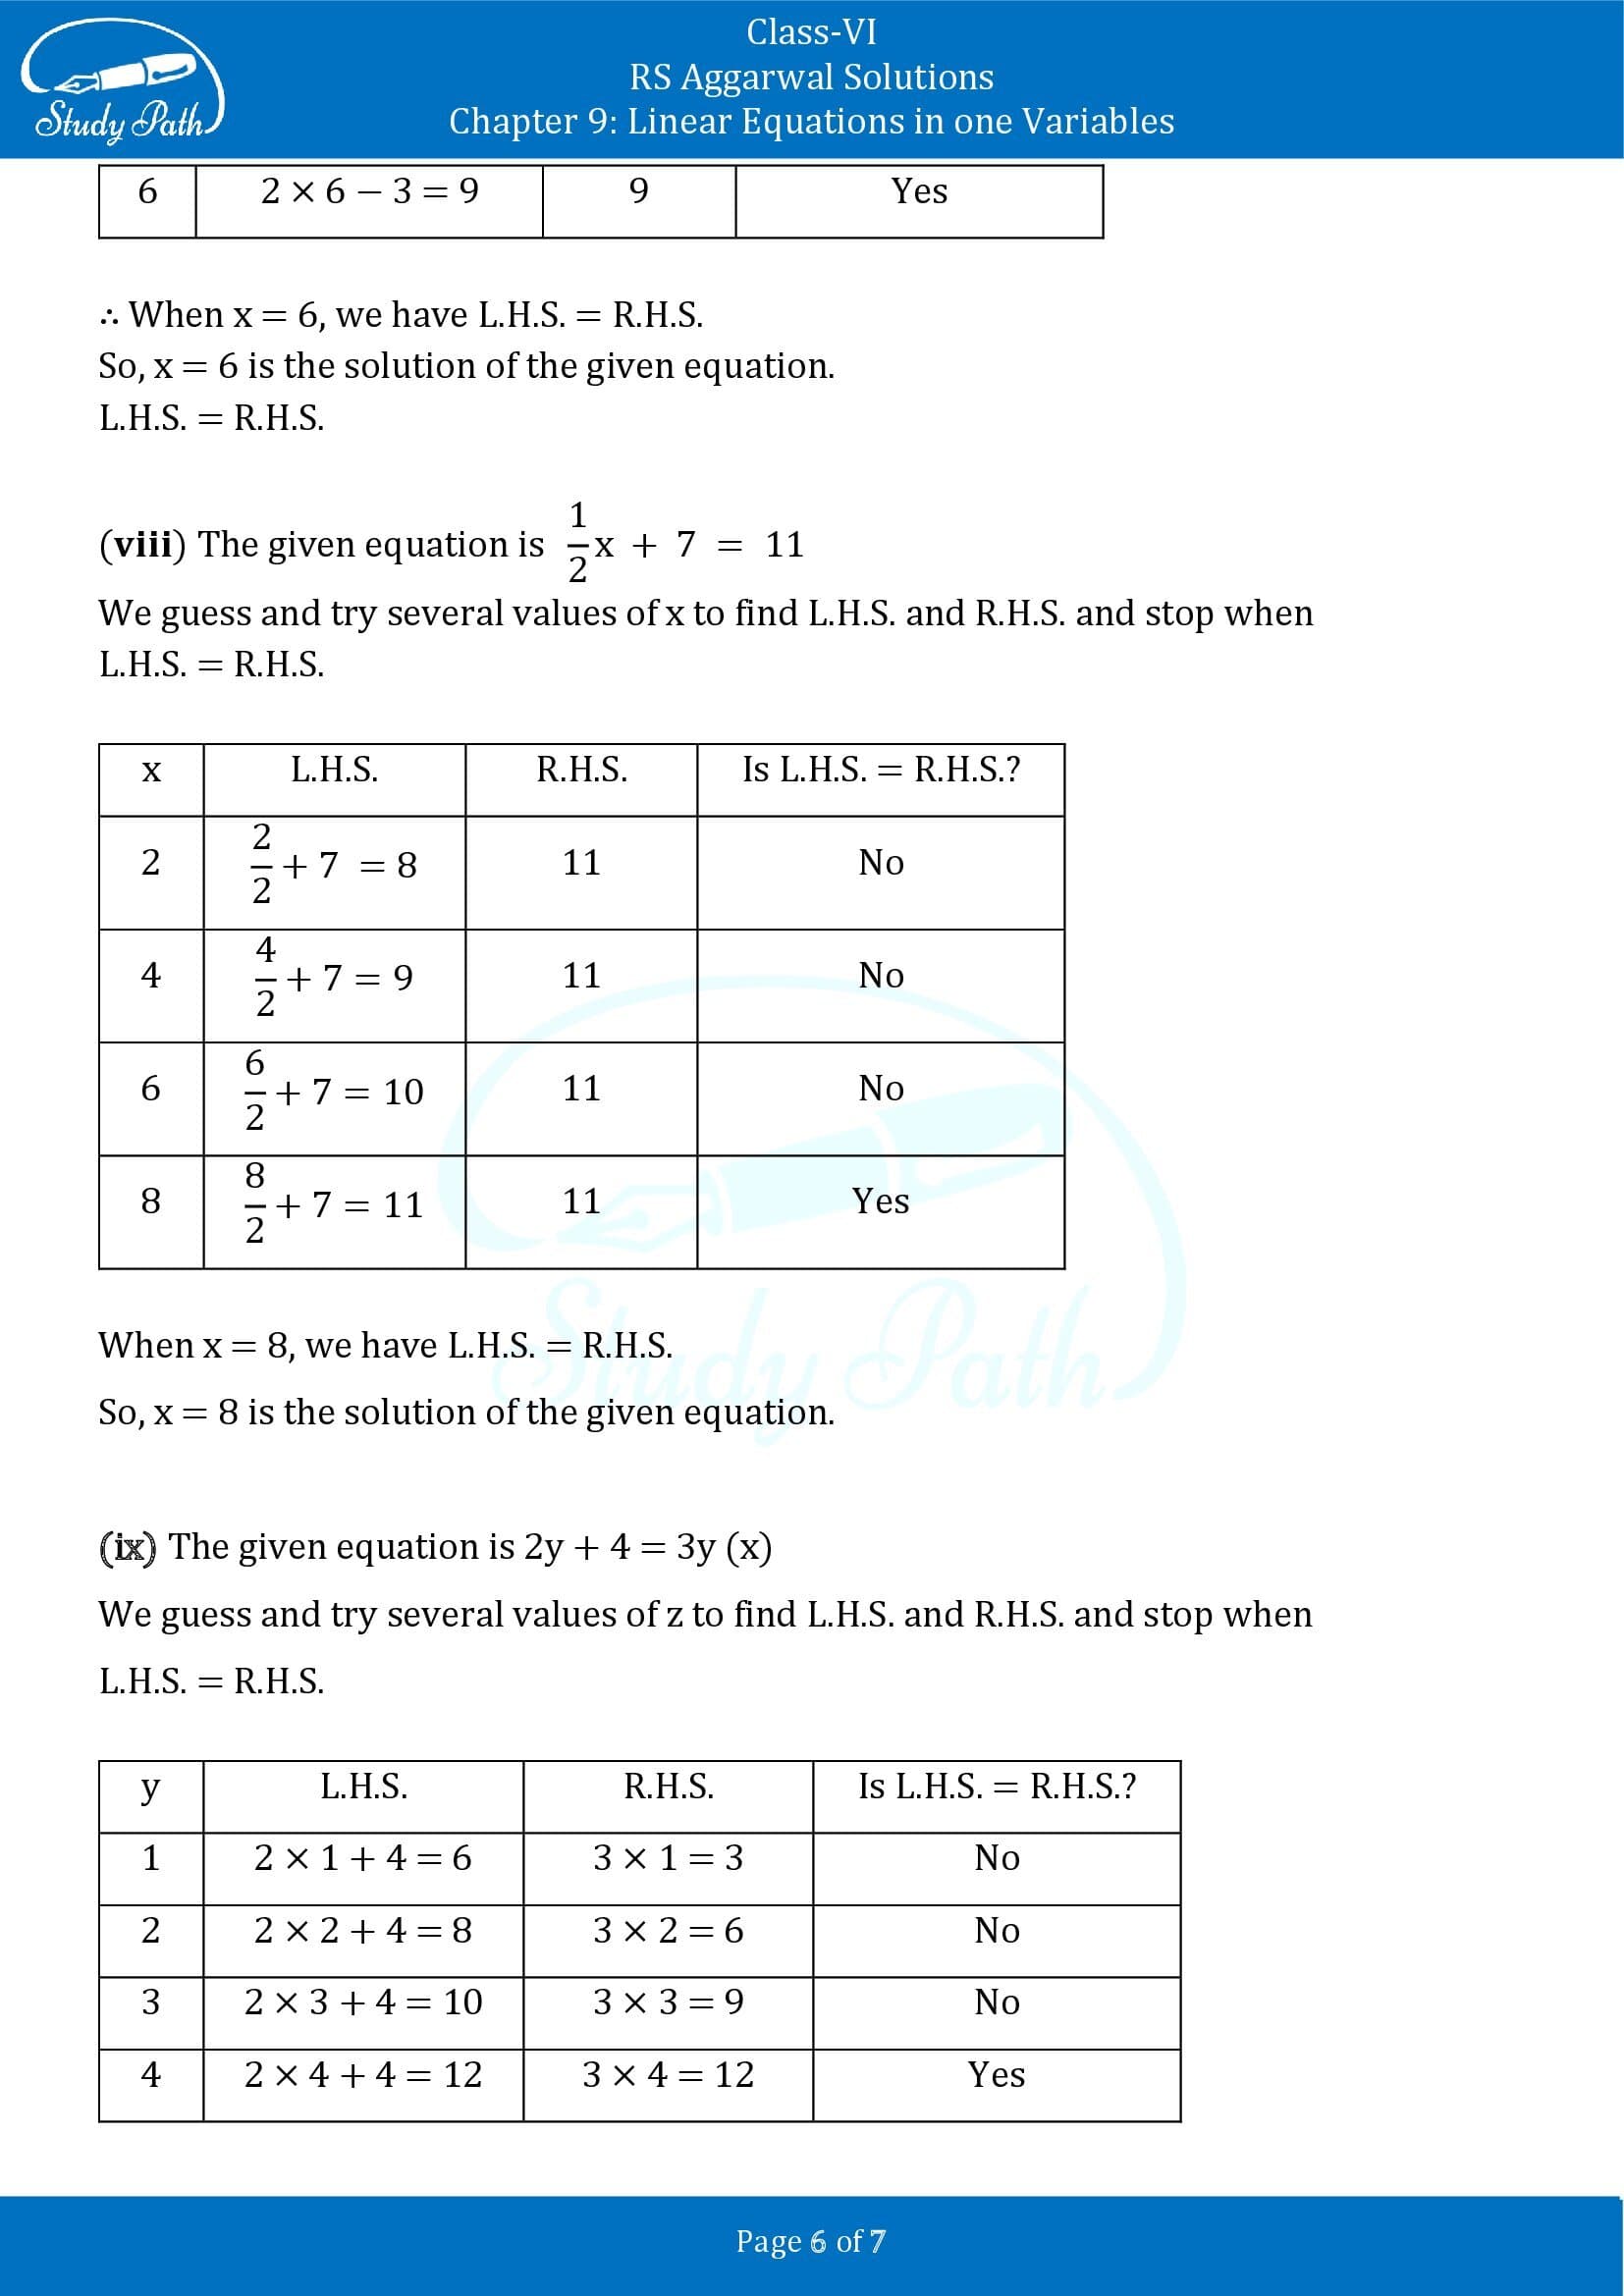 RS Aggarwal Solutions Class 6 Chapter 9 Linear Equations in One Variable Exercise 9A 00006